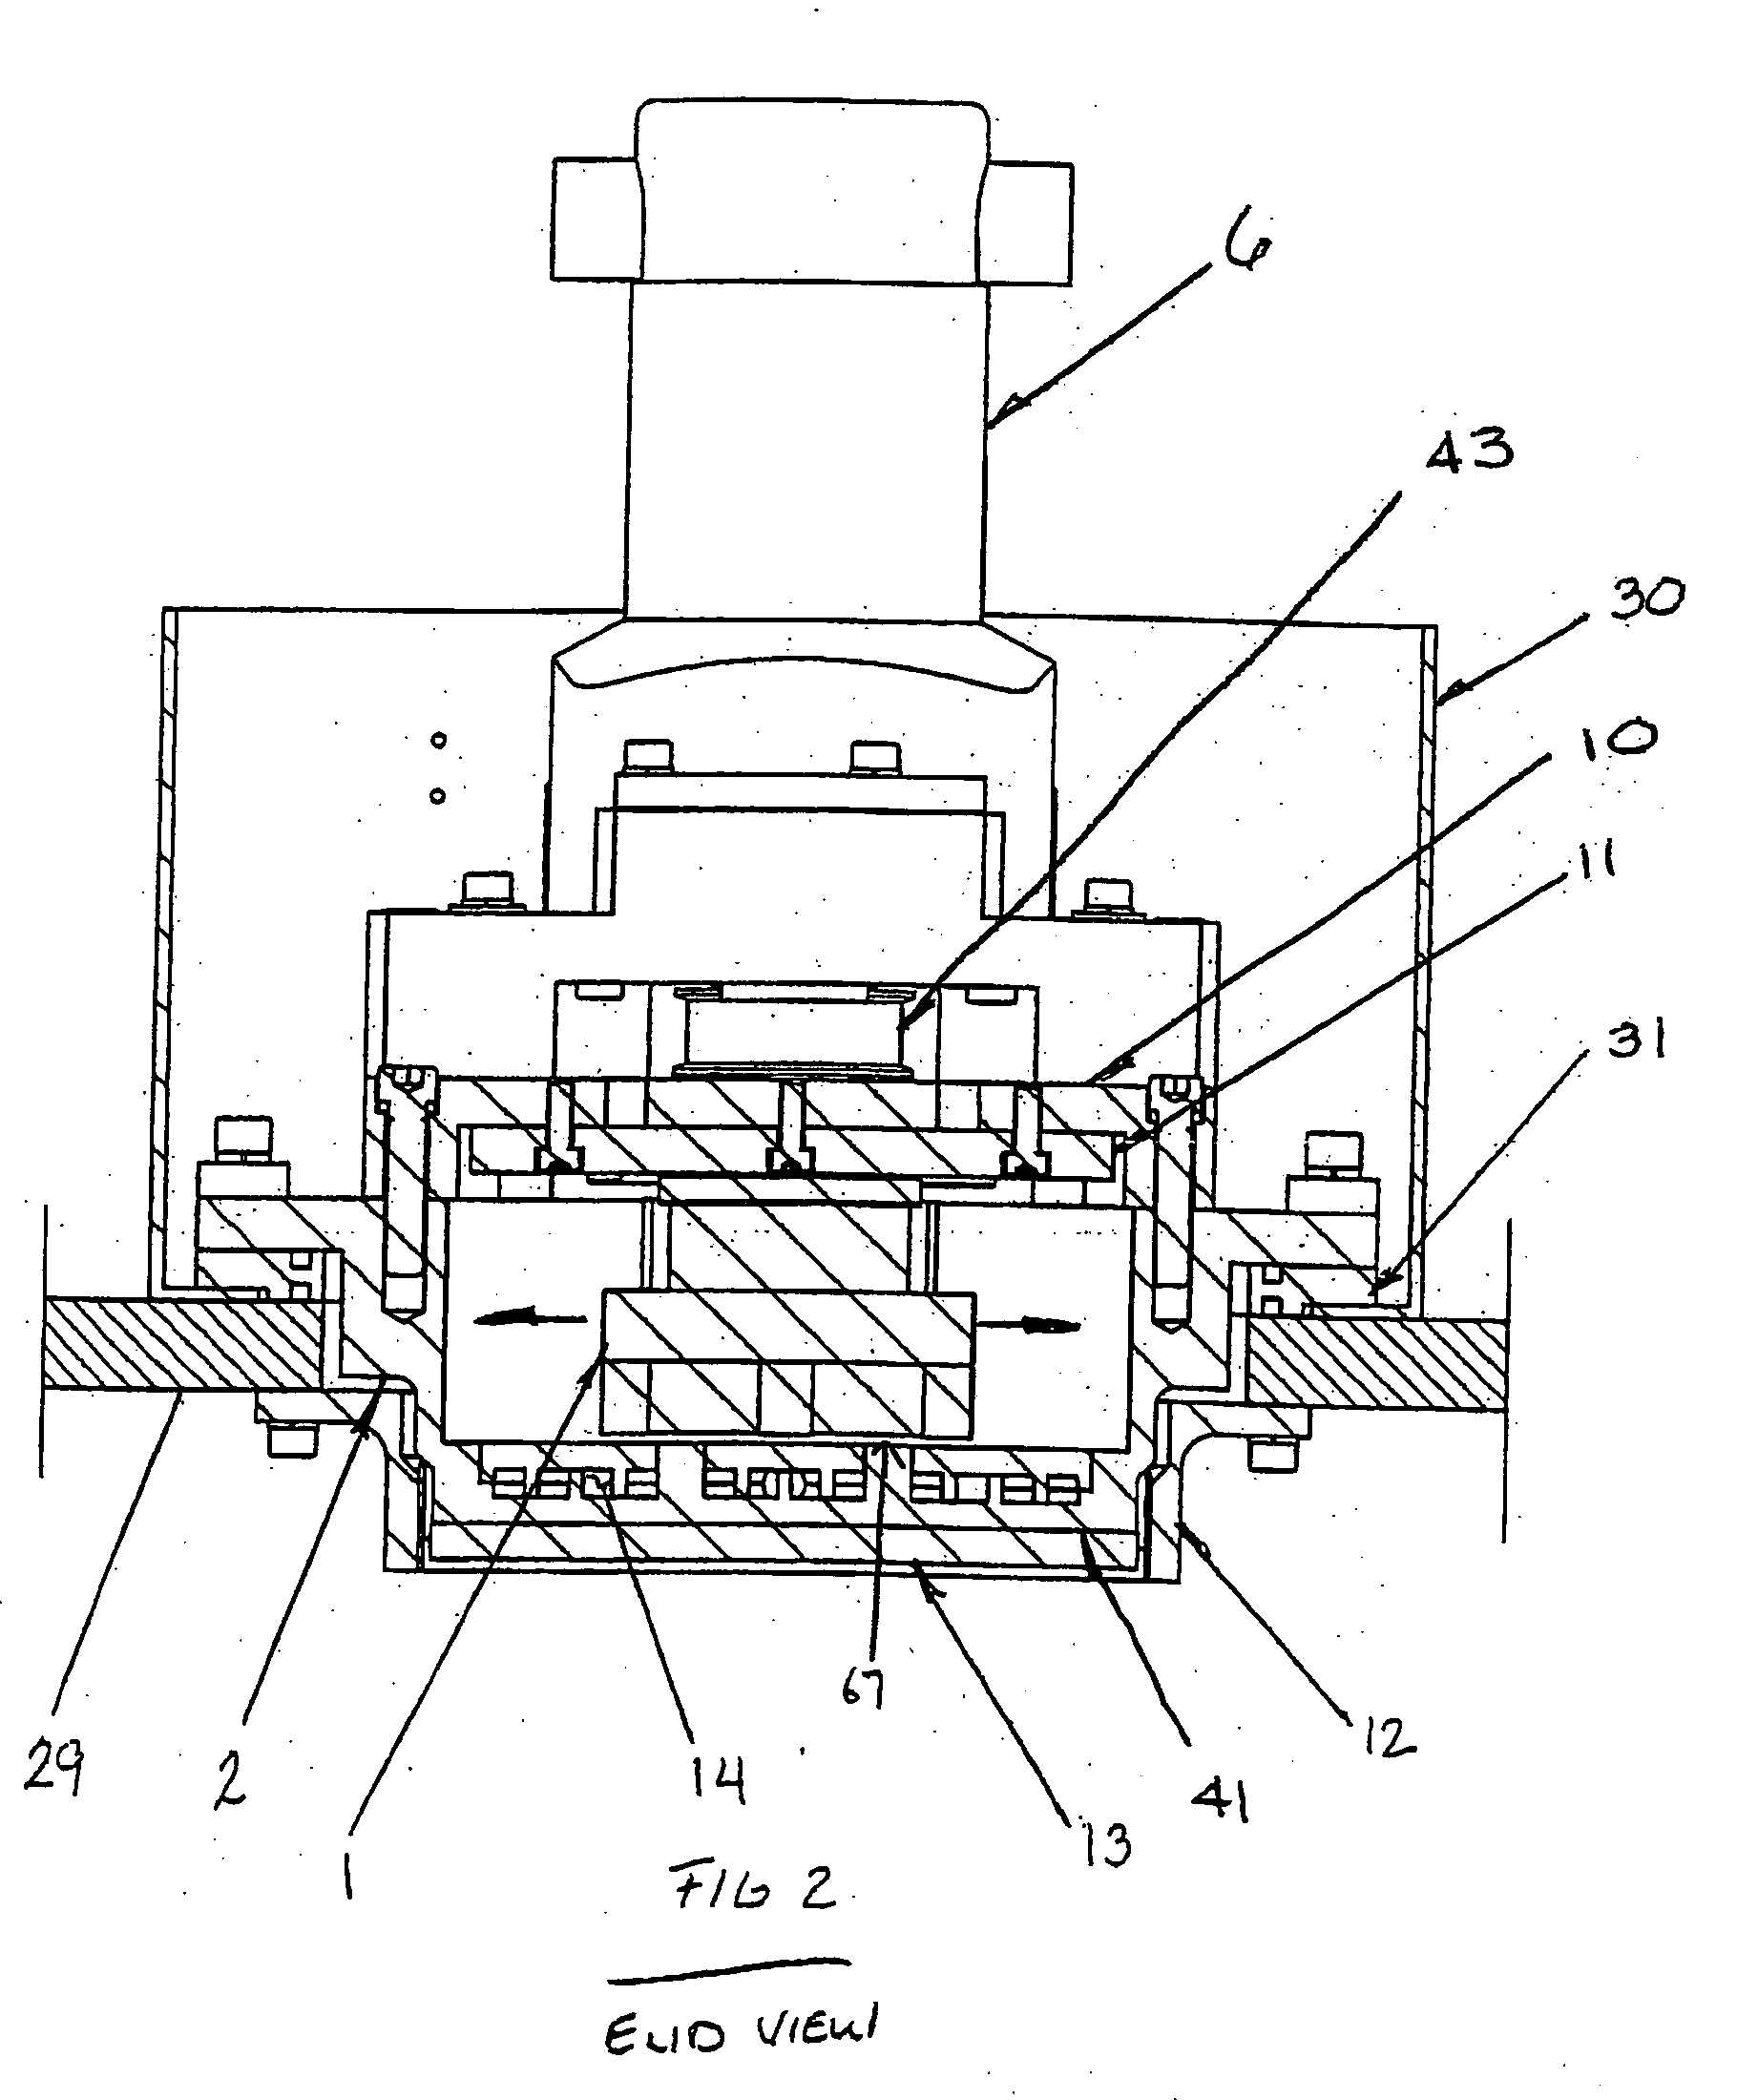 Linear sweeping magnetron sputtering cathode and scanning in-line system for arc-free reactive deposition and high target utilization